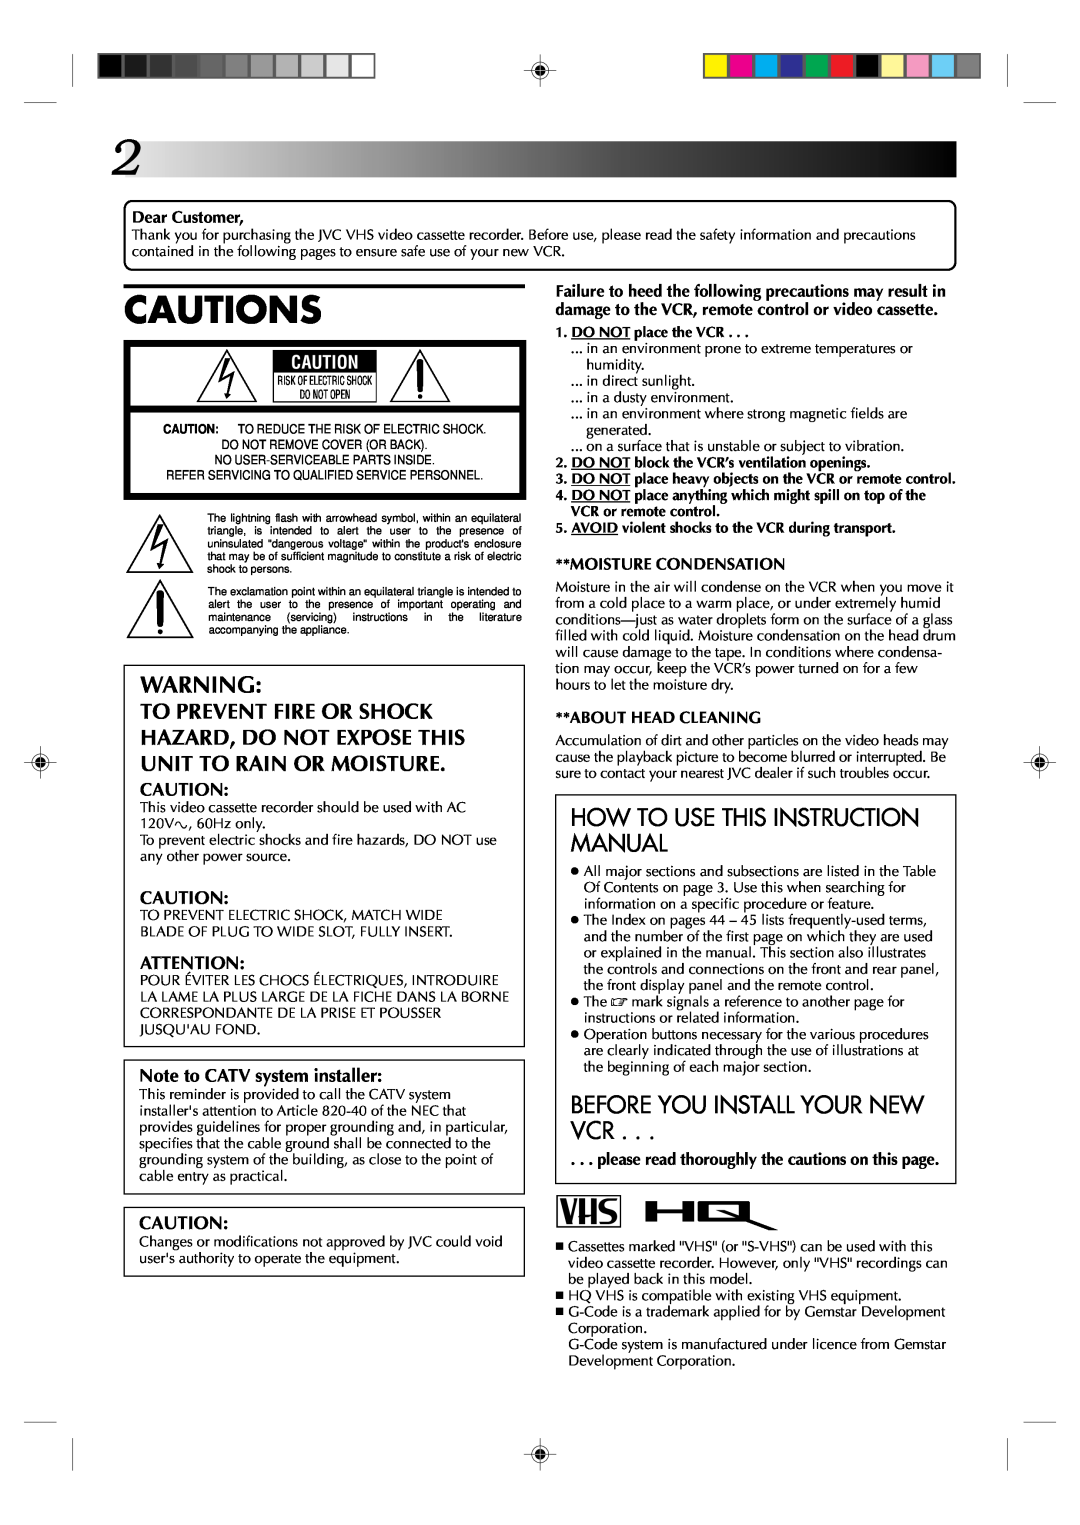 JVC HR-J631T manual Cautions, How To Use This Instruction Manual, Before You Install Your New Vcr, DO NOT place the VCR 